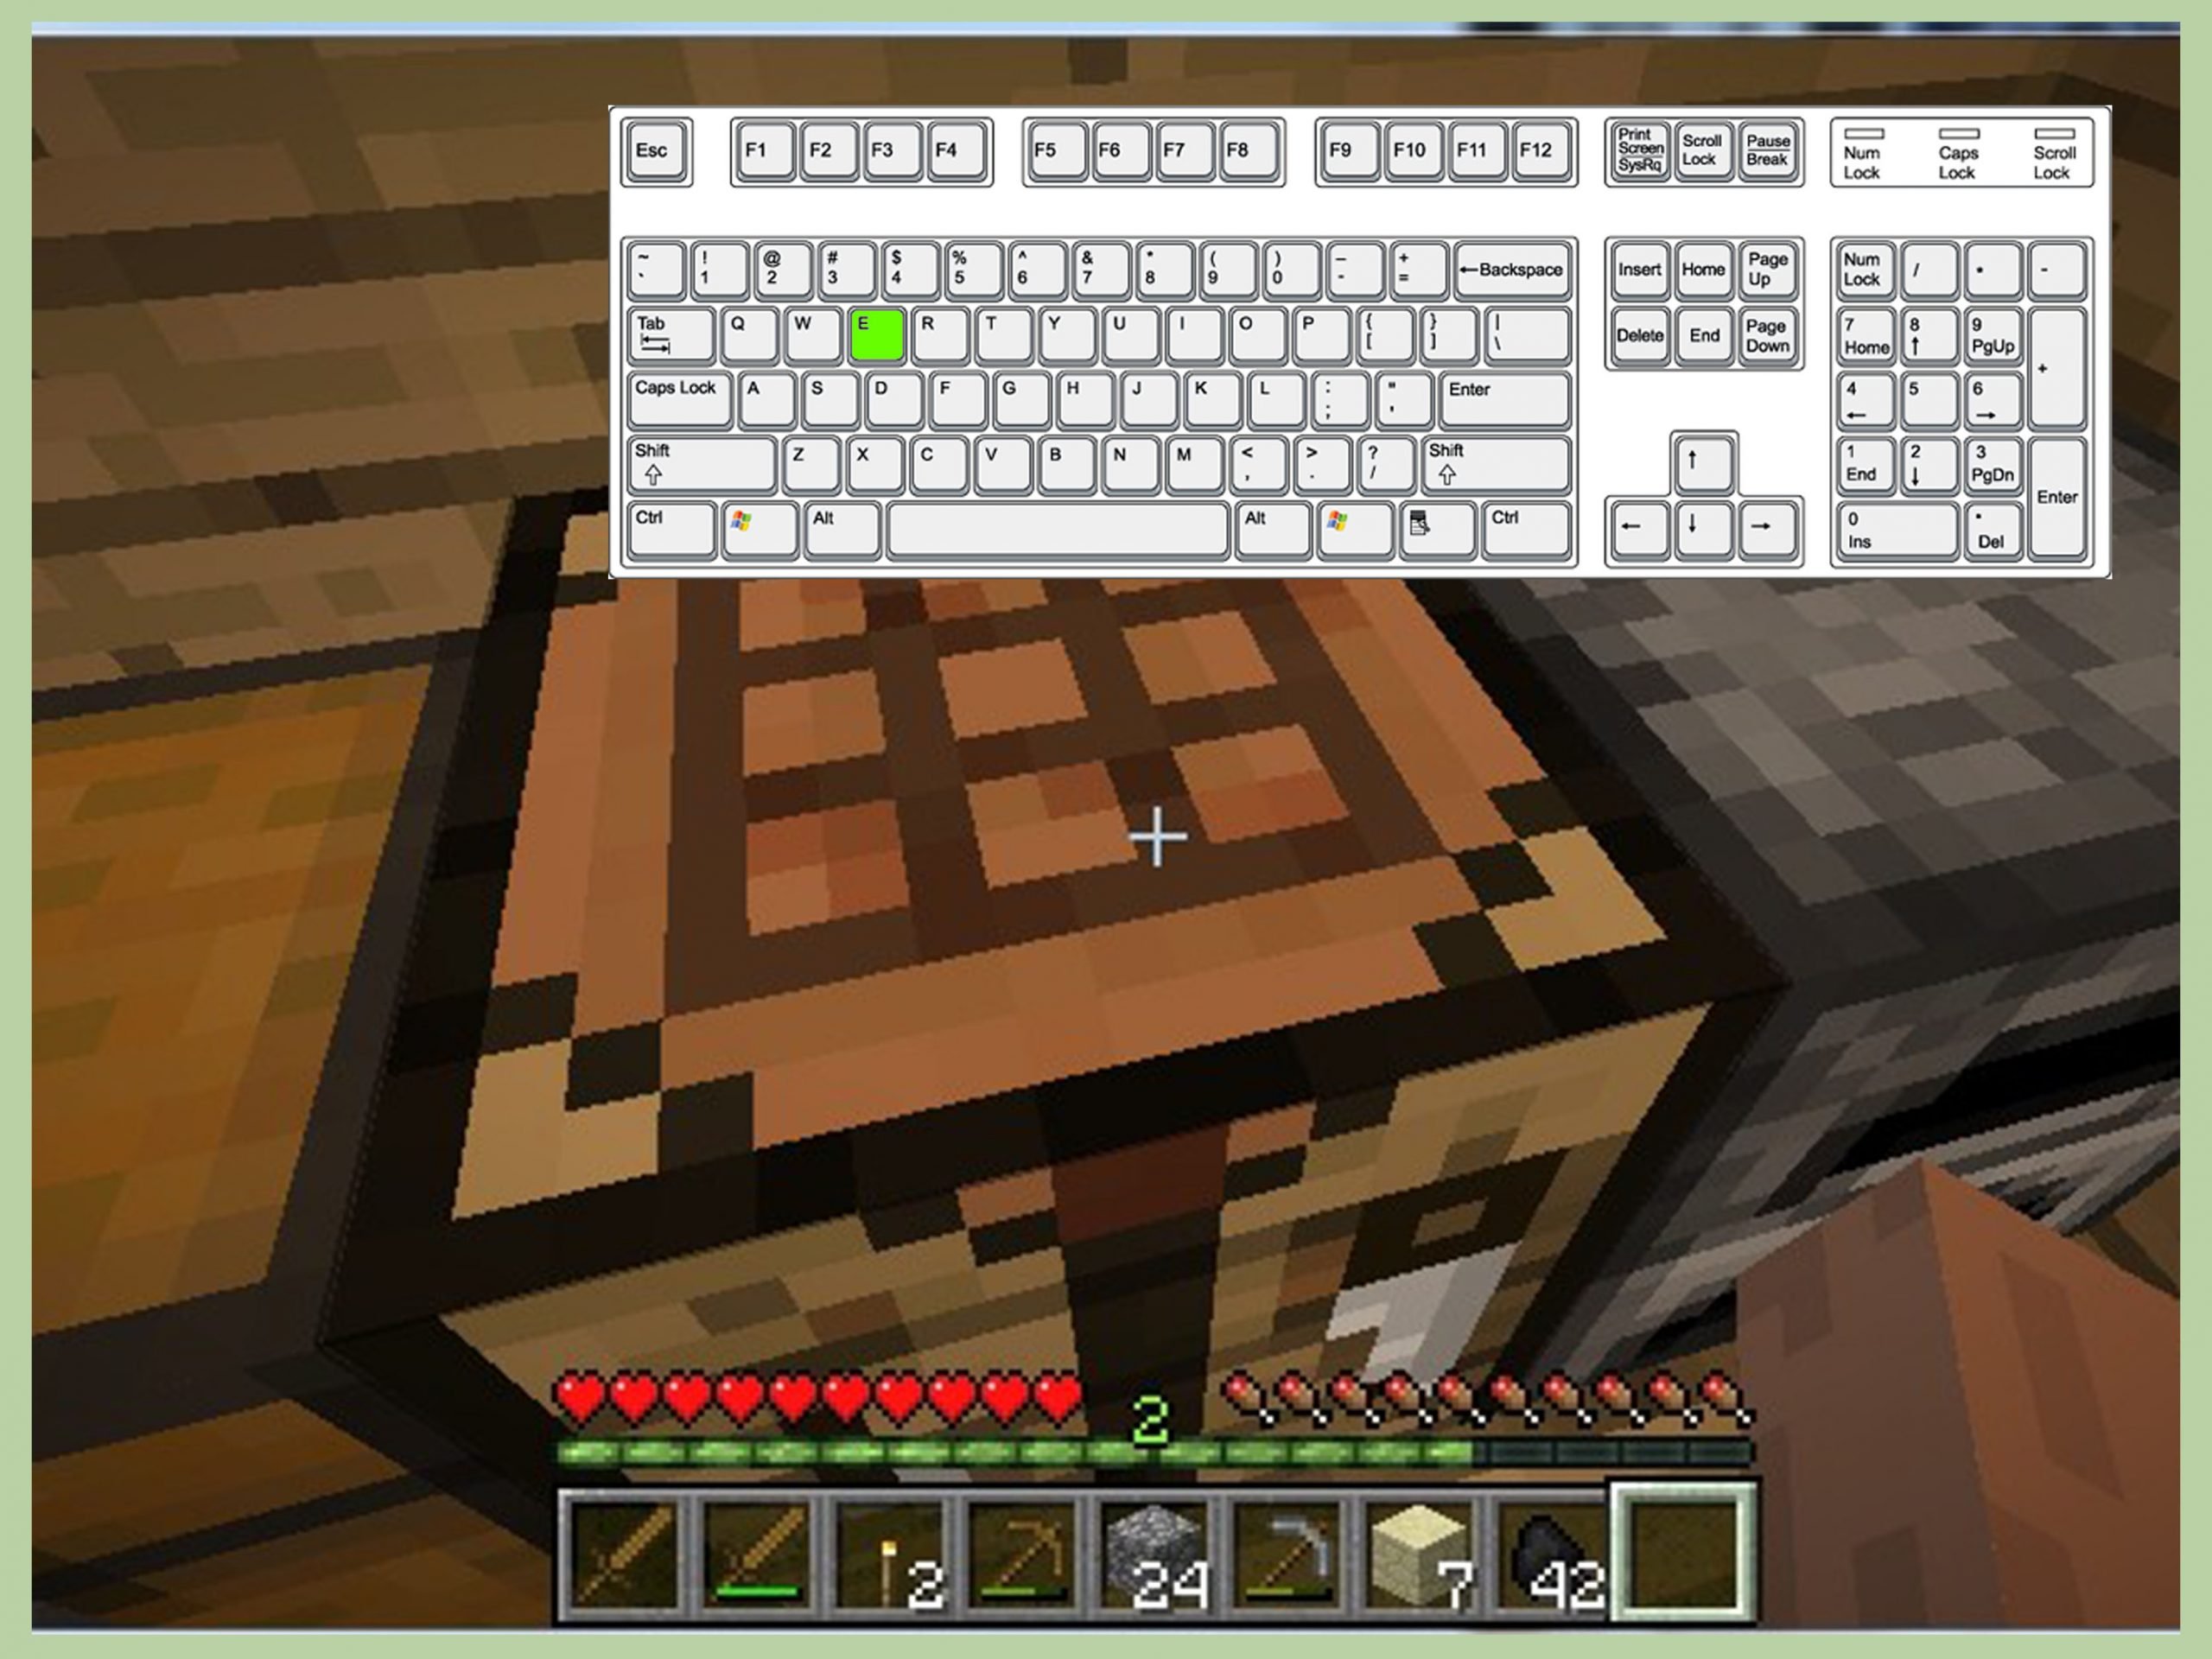 How to Make a Cauldron in Minecraft: 5 Steps (with Pictures)